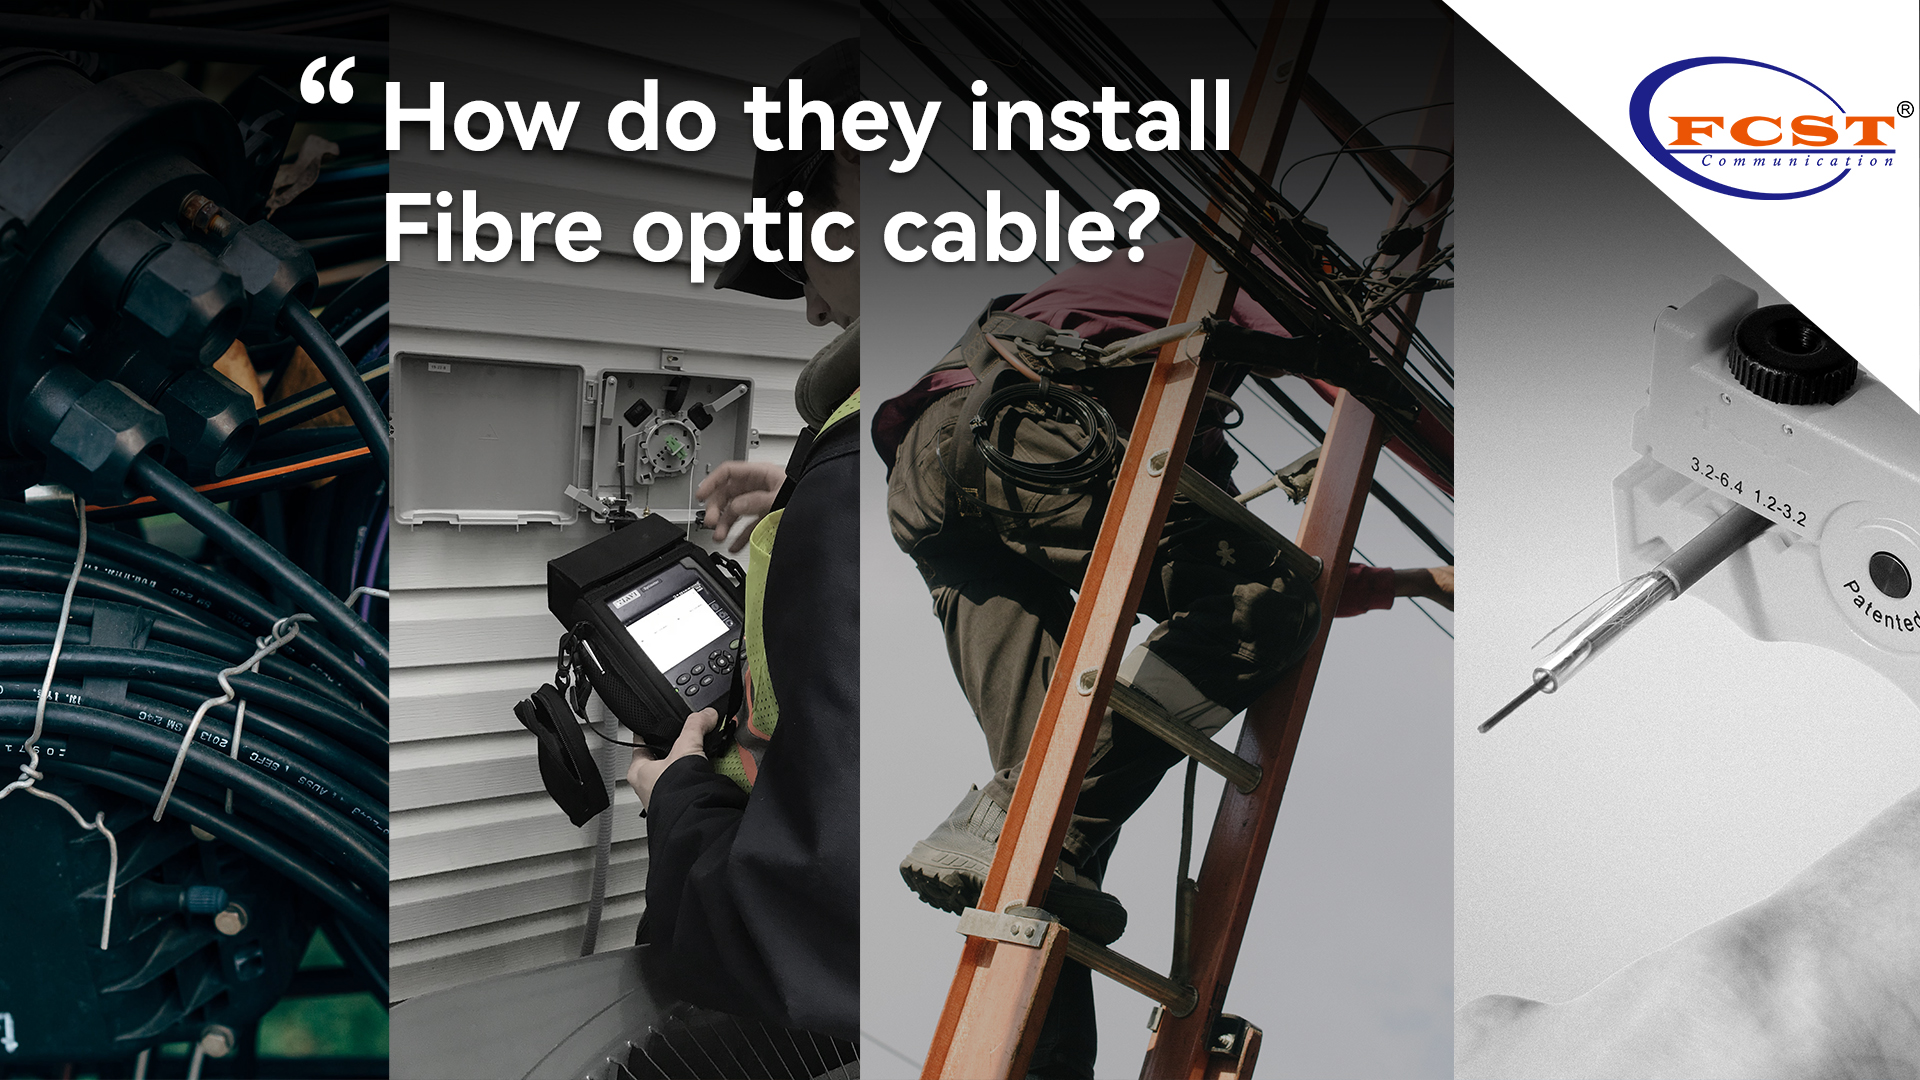 How do they install Fibre optic cable?